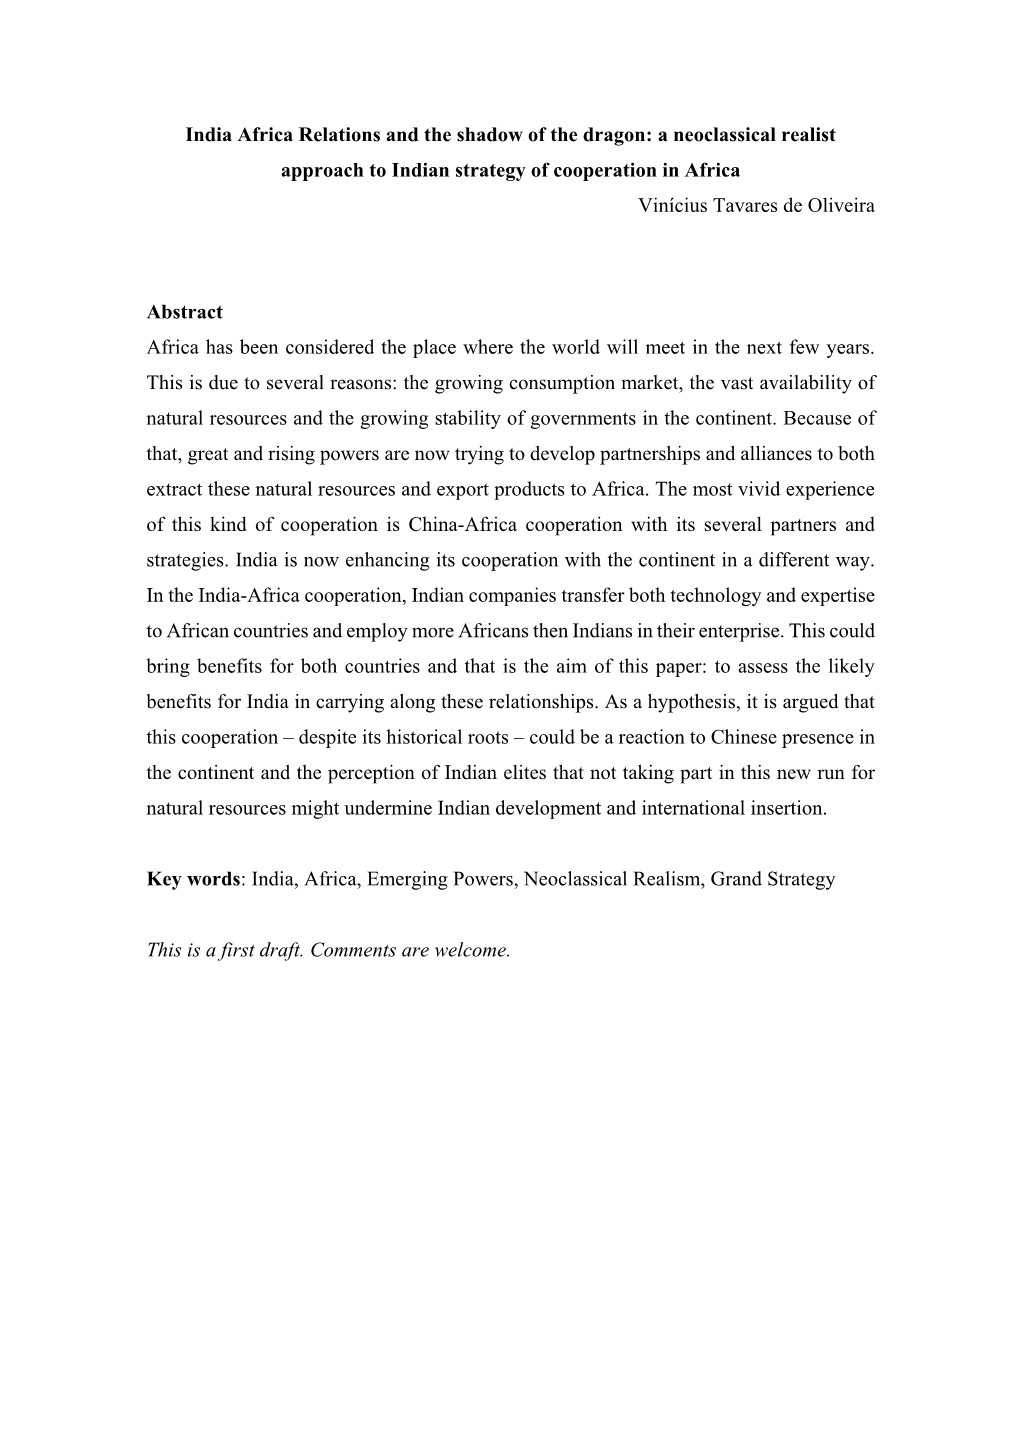 India Africa Relations and the Shadow of the Dragon: a Neoclassical Realist Approach to Indian Strategy of Cooperation in Africa Vinícius Tavares De Oliveira